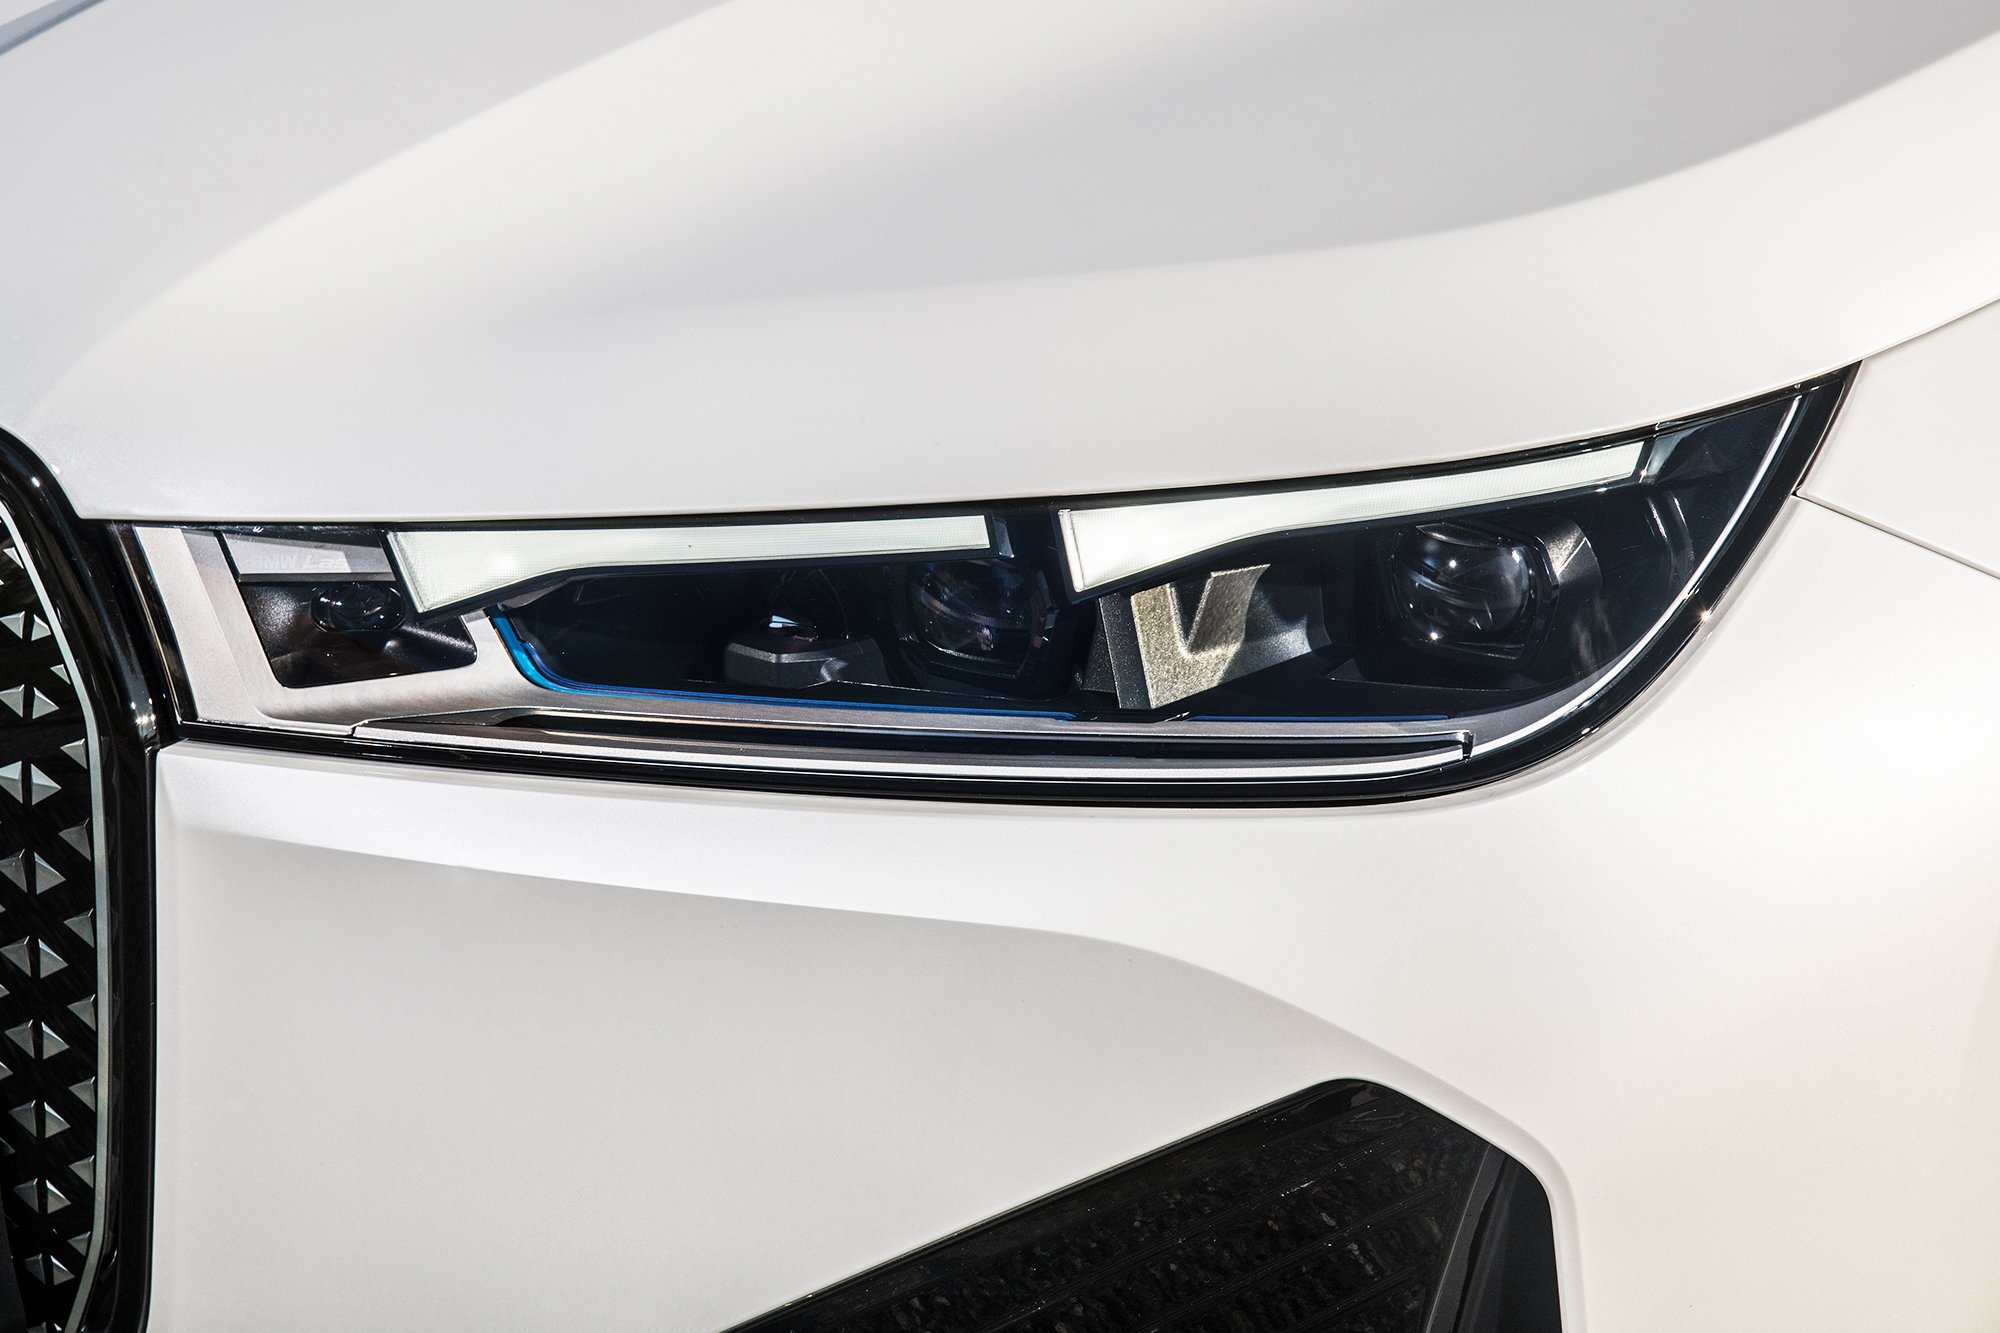 The futuristic front lights of the new BMW iX xDrive50